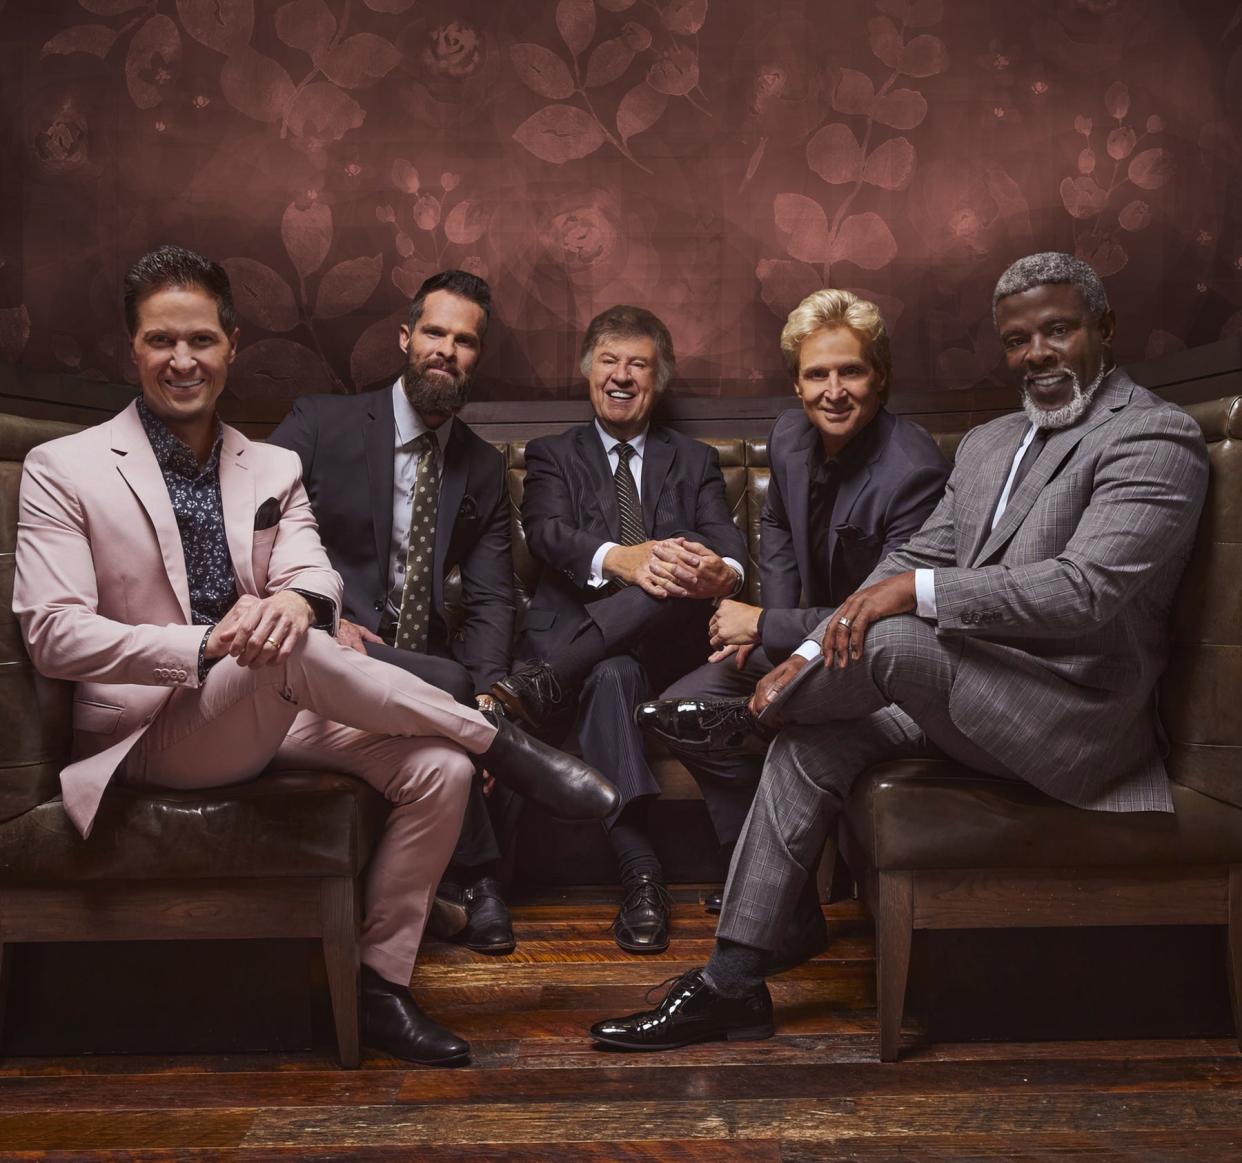 Multi-Grammy Award winning recording artist, Bill Gaither will kicks off the Moments To Remember Tour this Spring, as he brings his multi-award winning group, The Gaither Vocal Band to Amarillo’s Civic Center Auditorium on Saturday, Feb. 24 at 6 p.m.